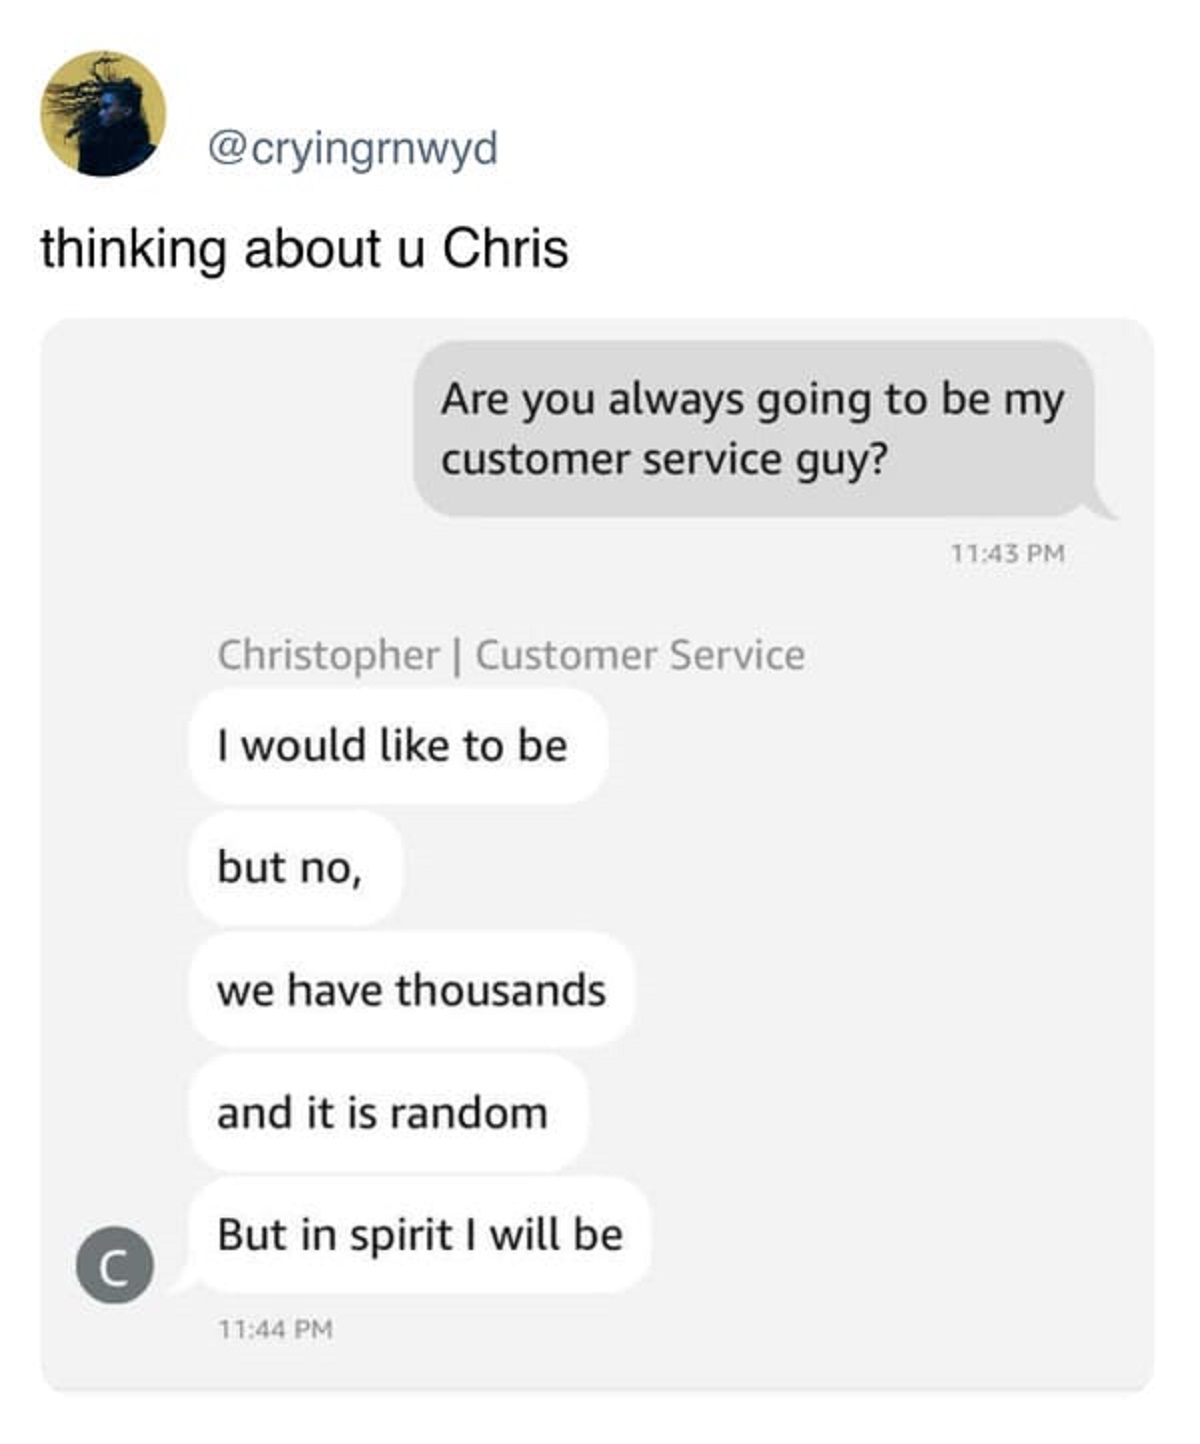 screenshot - thinking about u Chris Are you always going to be my customer service guy? C Christopher | Customer Service I would to be but no, we have thousands and it is random But in spirit I will be